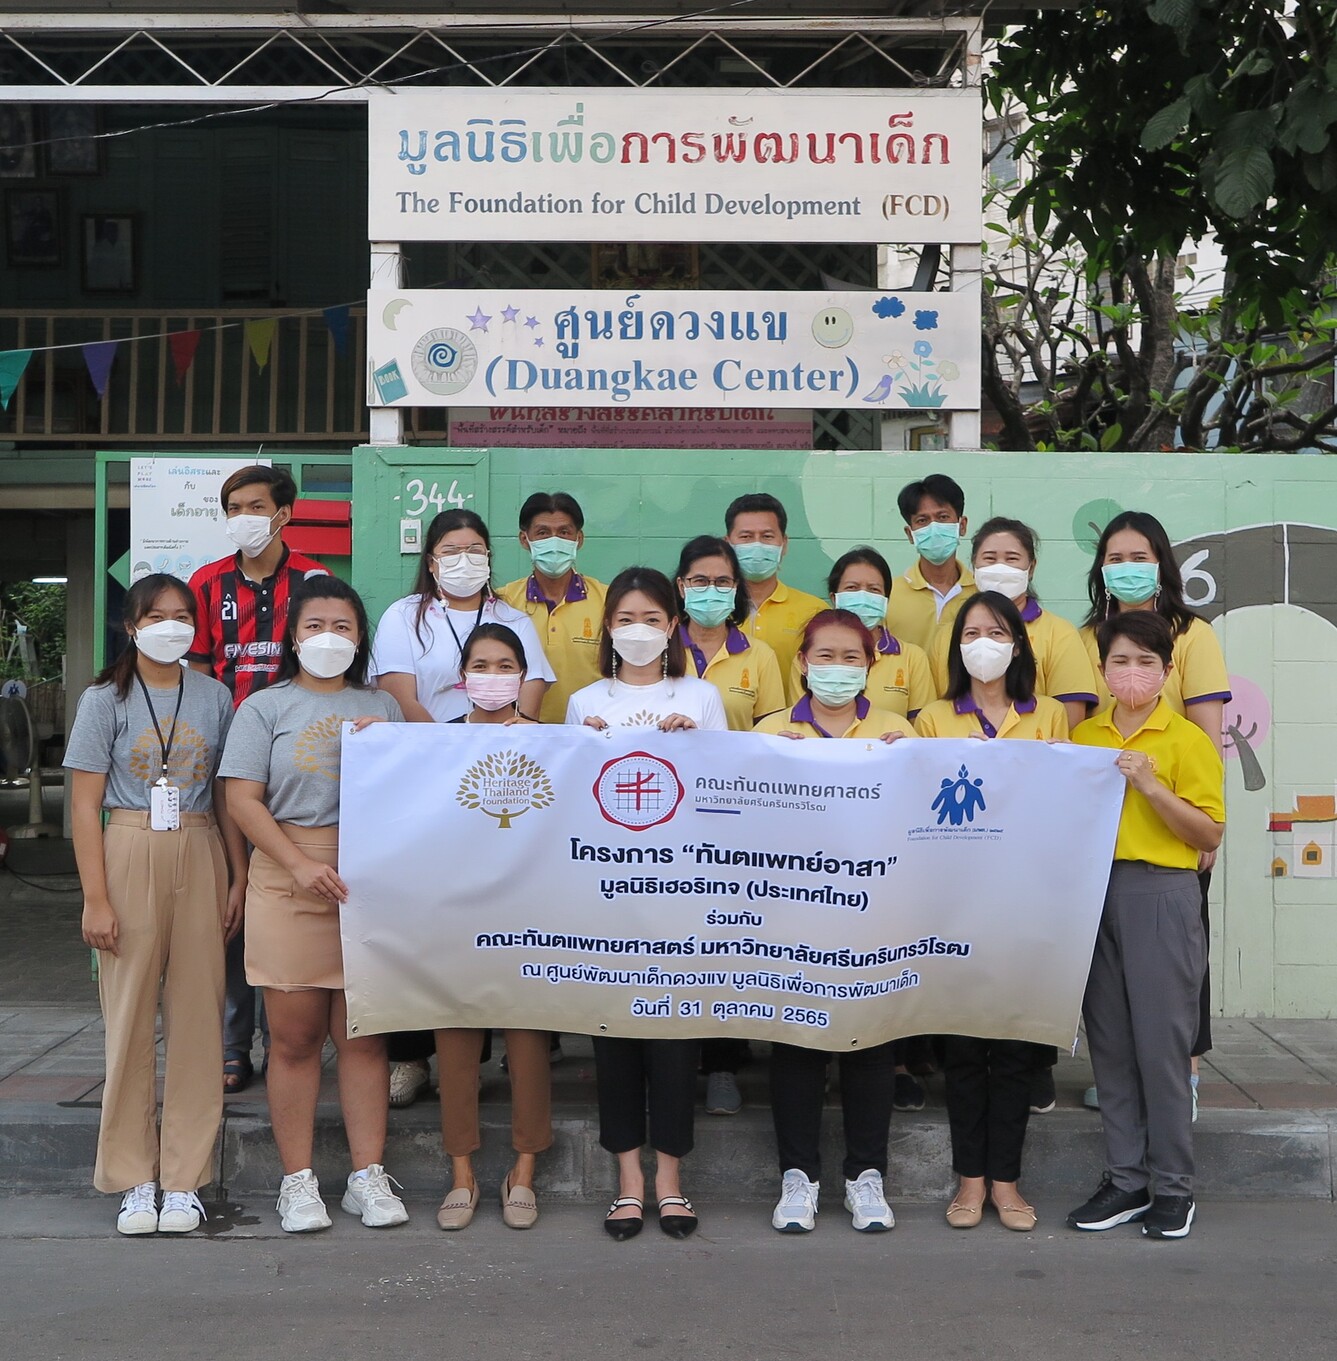 Heritage Thailand Foundation with Srinakharinwirot University Brings “Dentist Volunteer” Campaign to The Foundation for Child Development at Duangkae Center